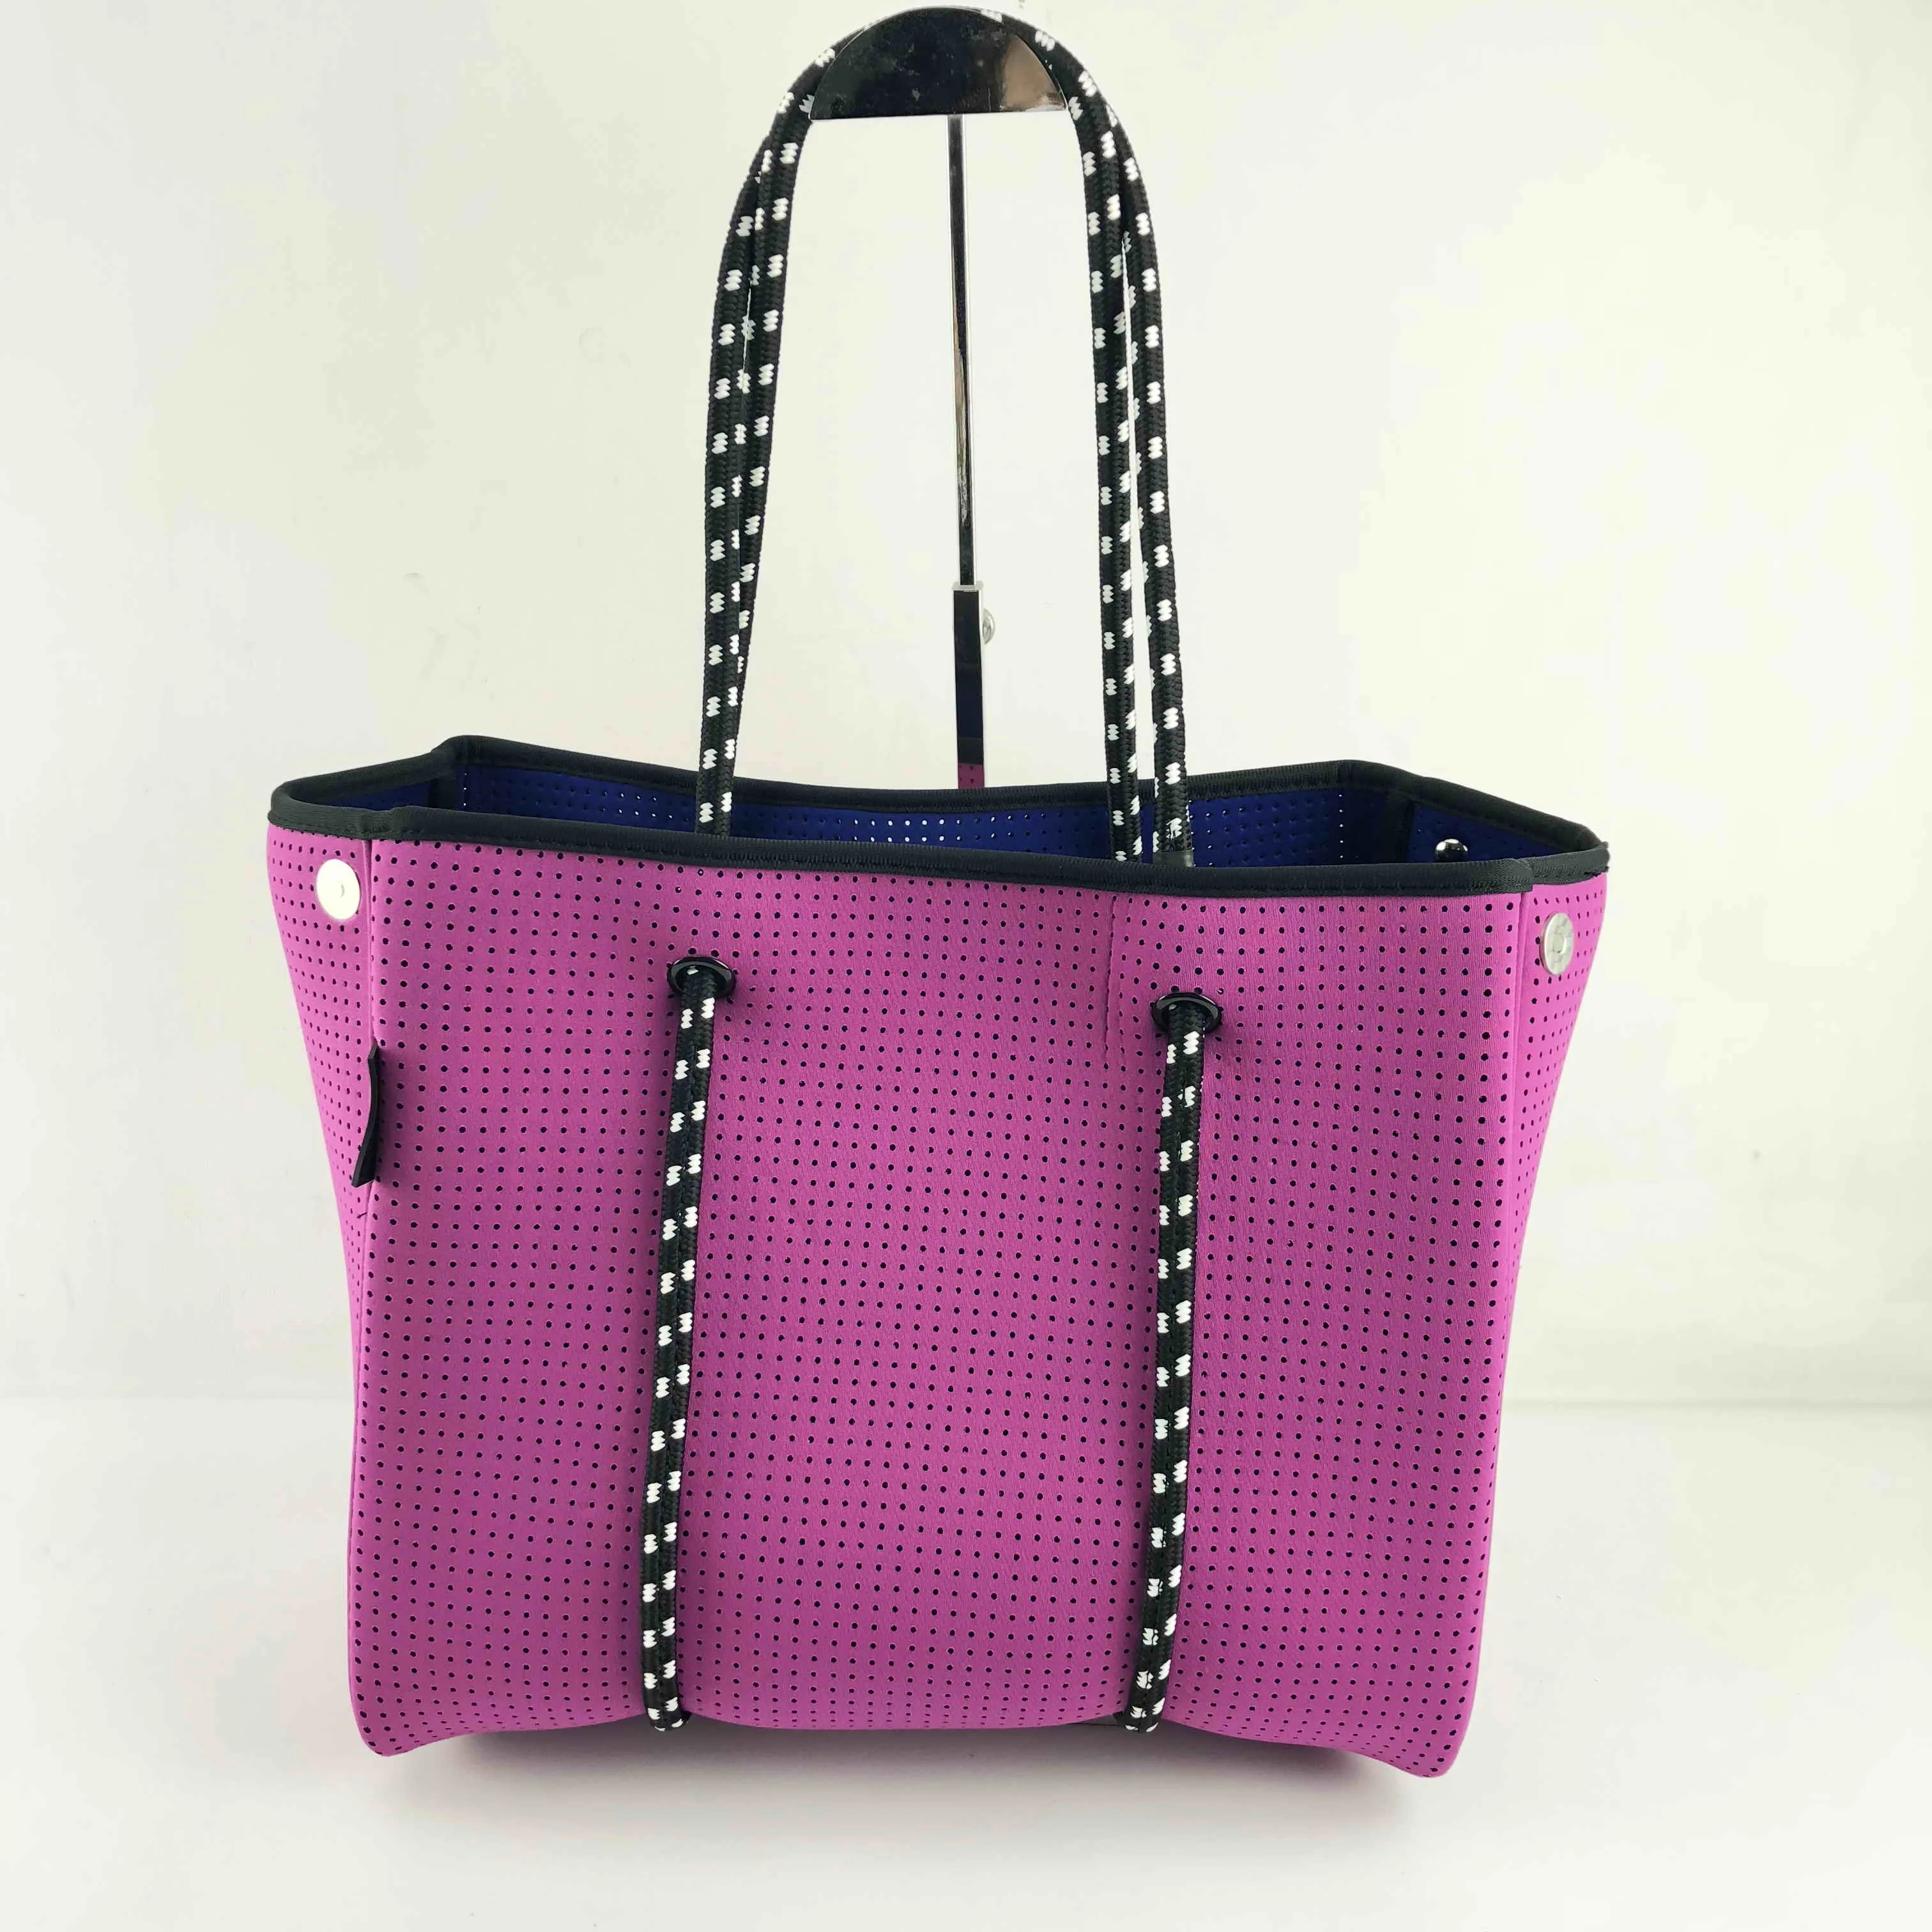 2019 Fashion Soft Material Perforated Neoprene Bag Beach Bag With Small ...